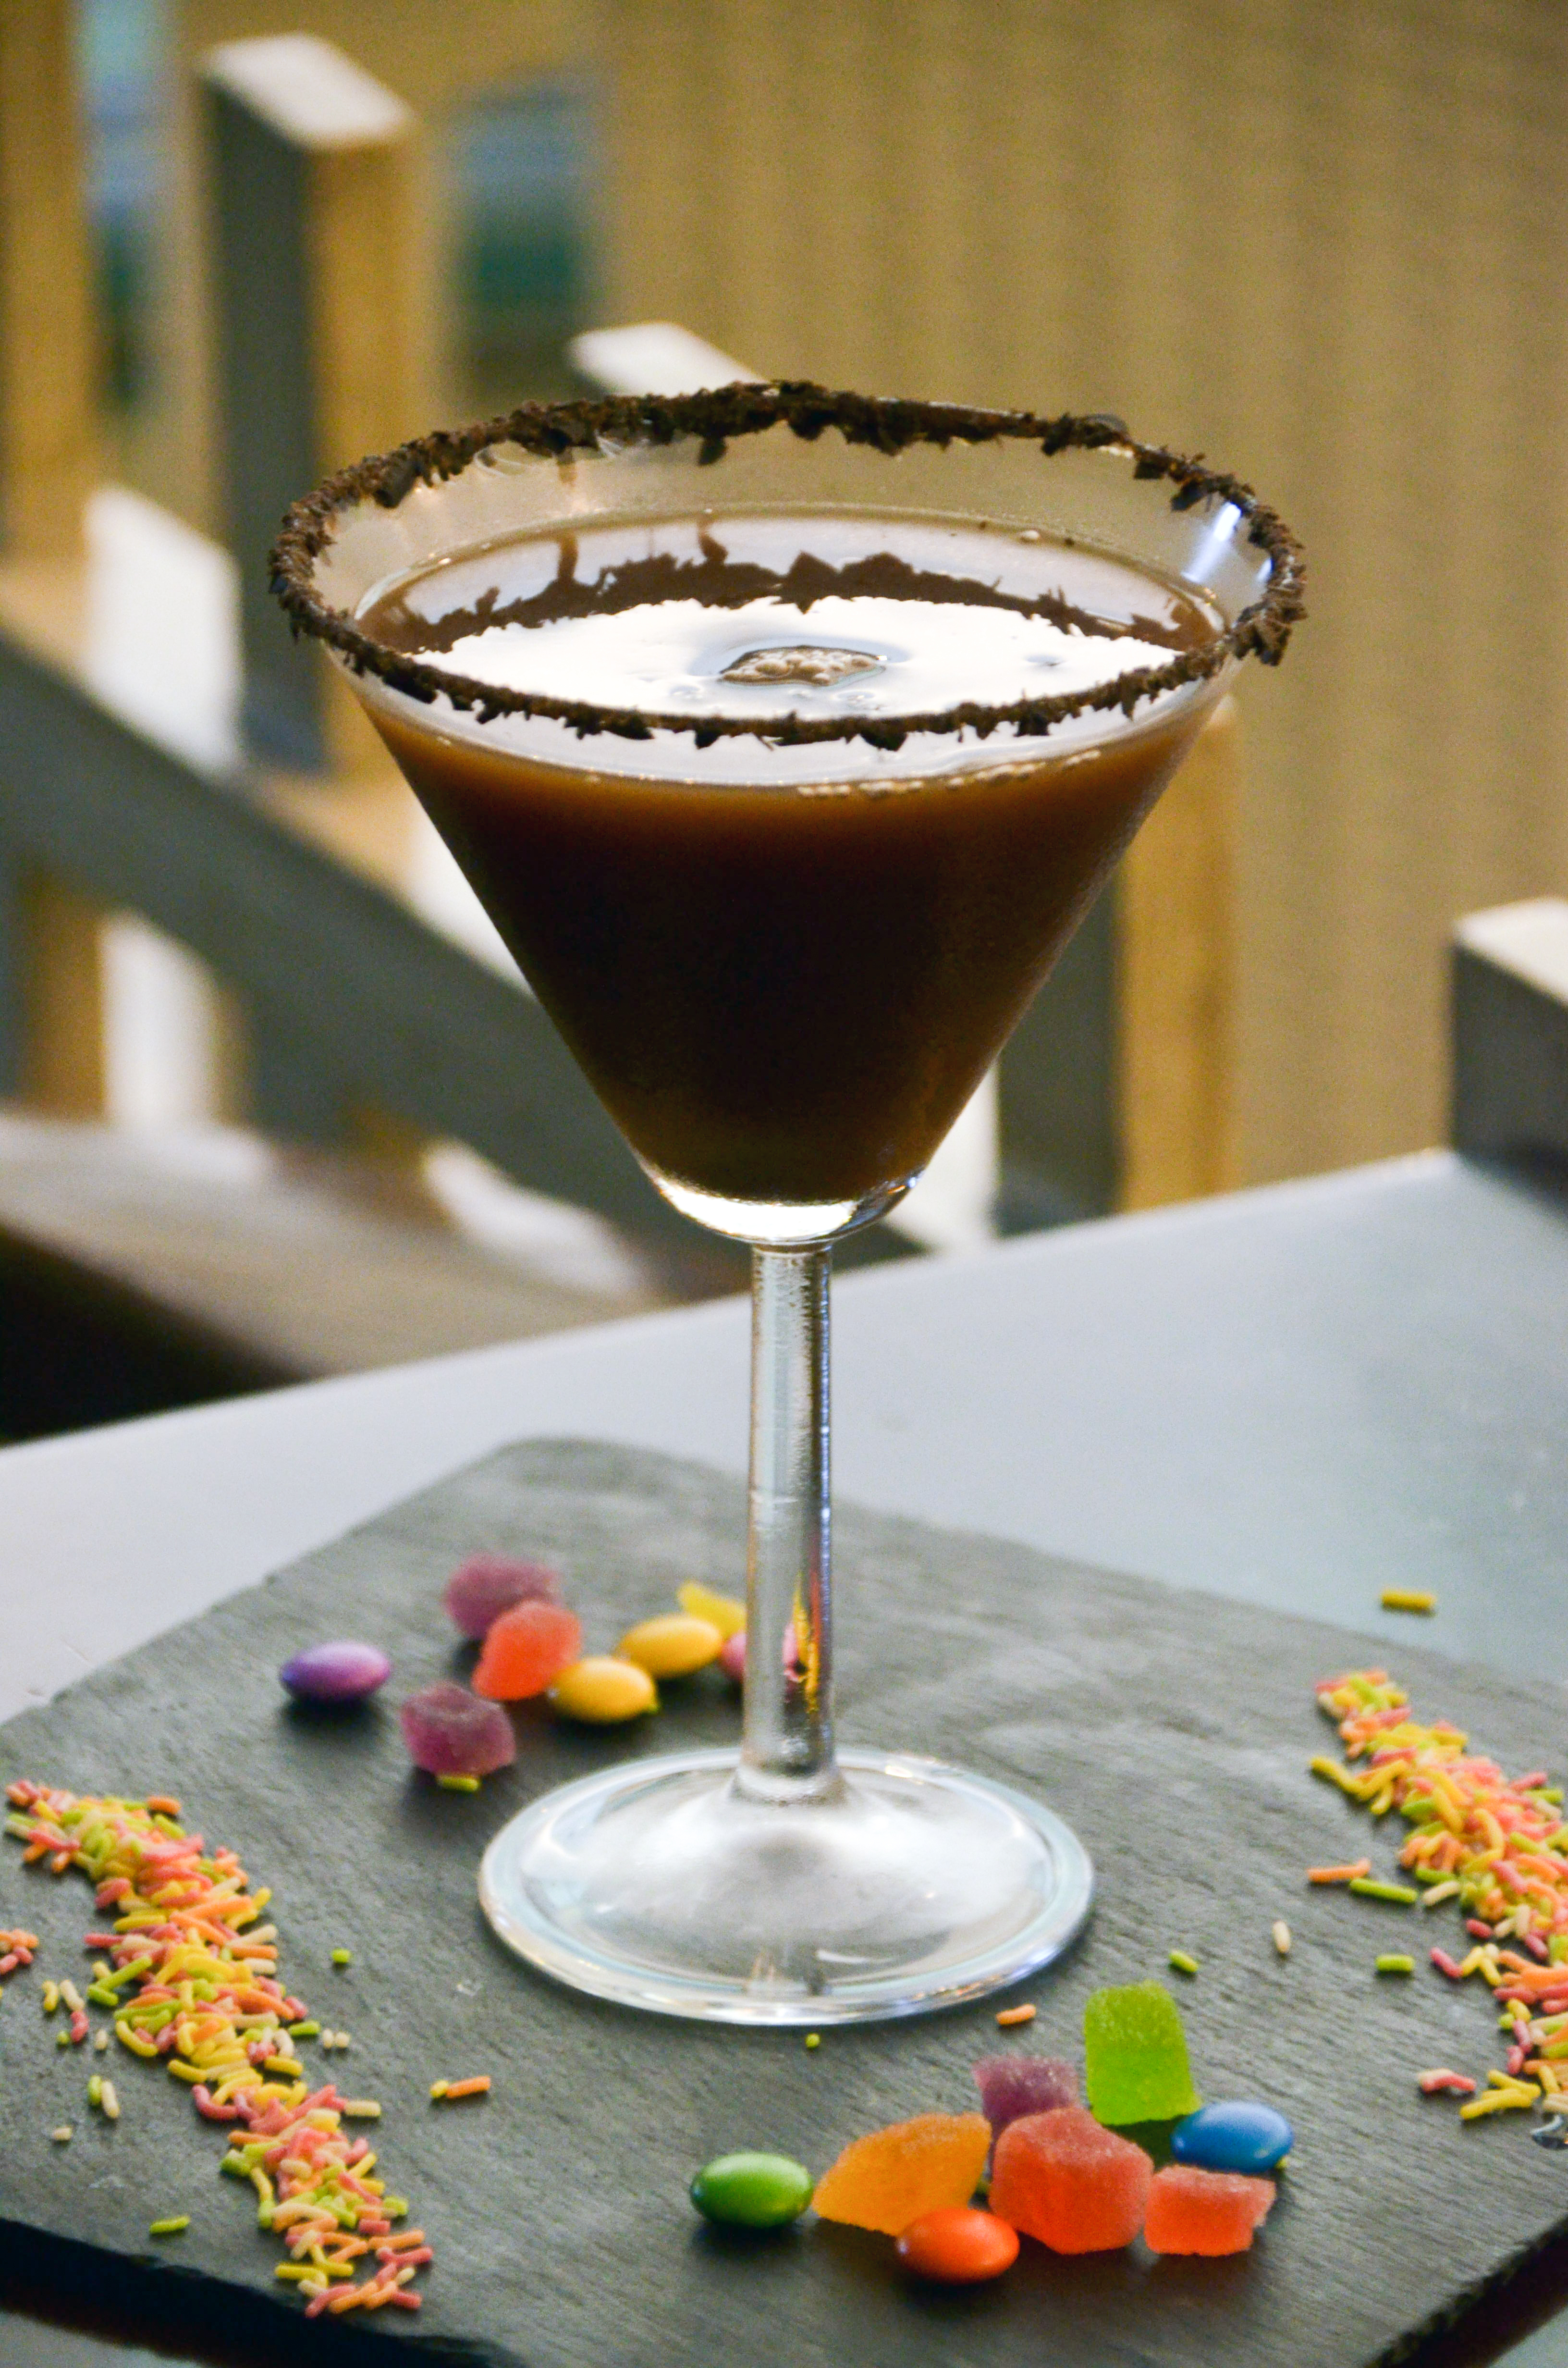 RELISH THE AMAZING TASTE OF THESE CHOCOLATE COCKTAILS